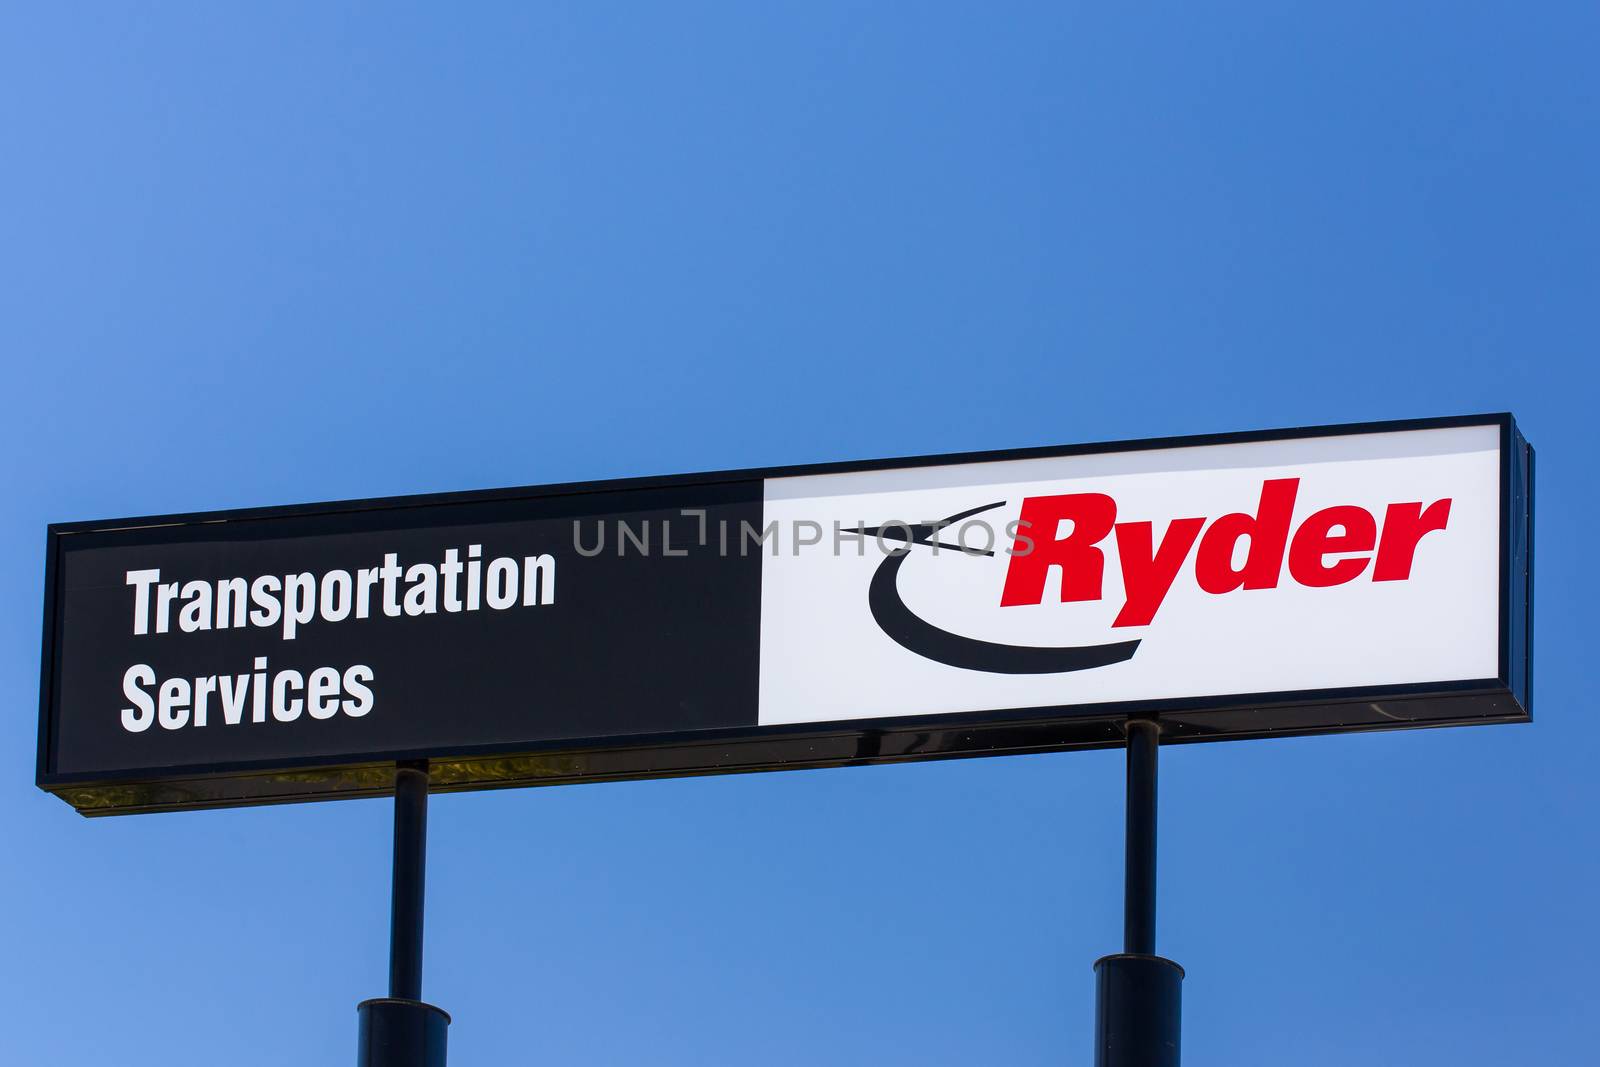 SANTA FE SPRINGS, CA/USA - APRIL 16, 2016: Ryder Corporation sign and logo. Ryder System, Inc.is an American-based provider of transportation and supply chain management products.